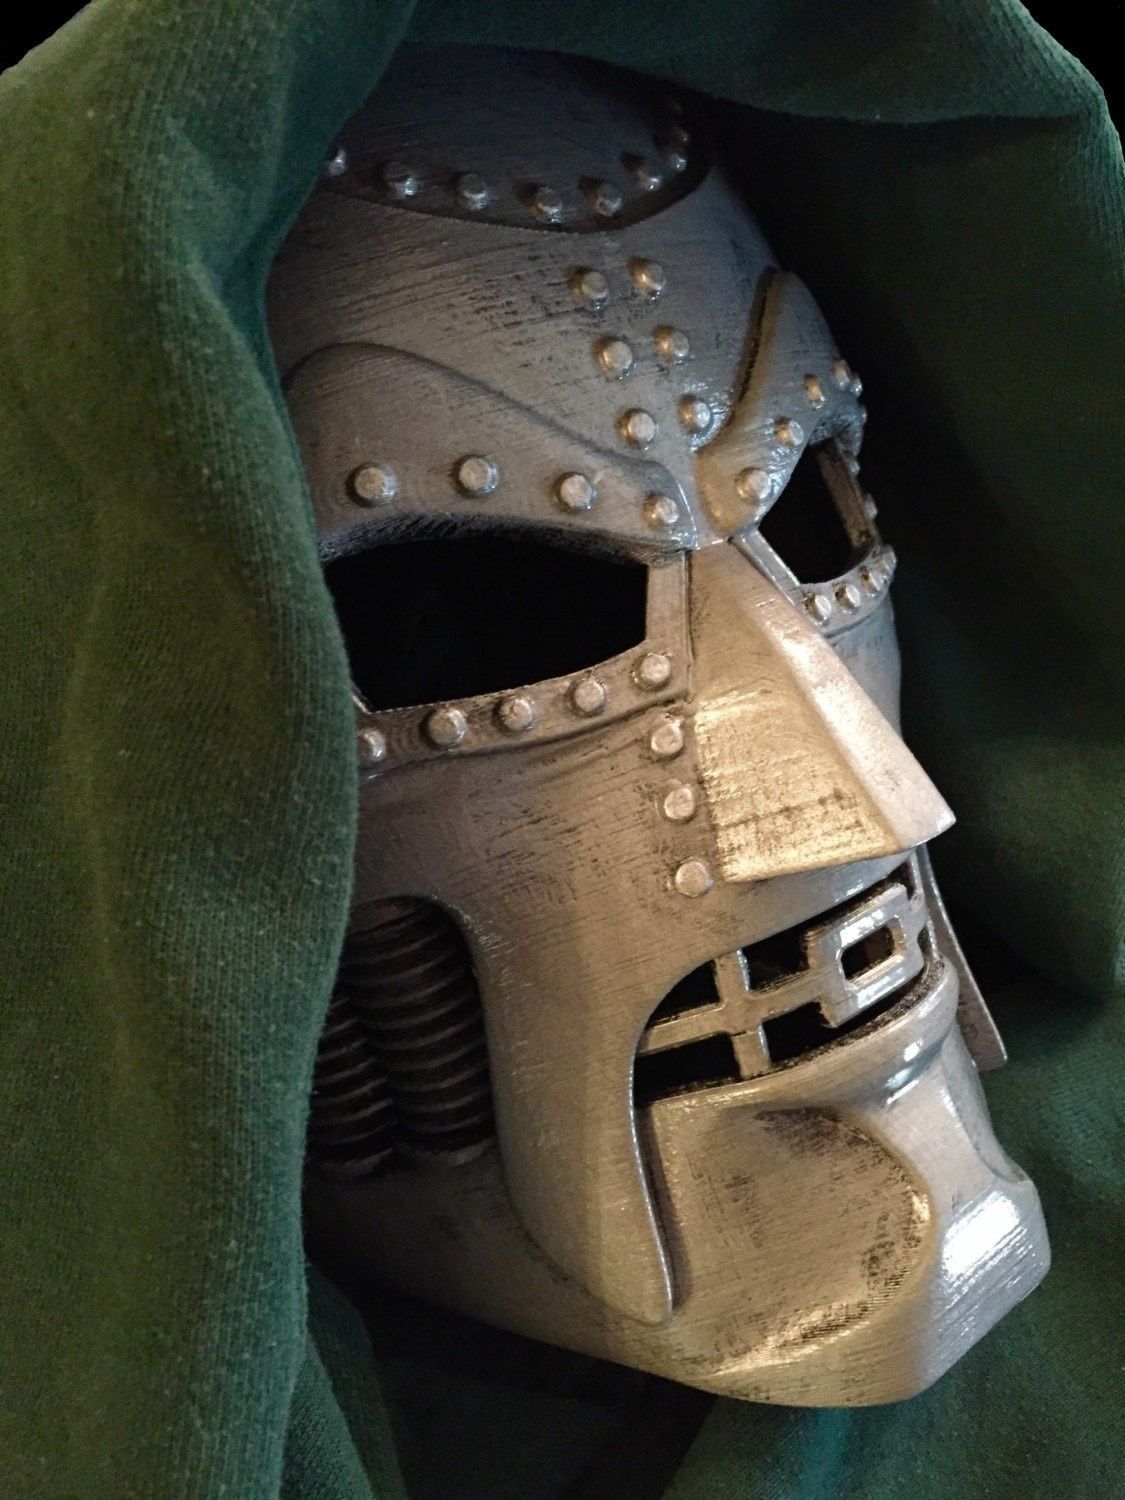 mighty mod of doom cotton face mask